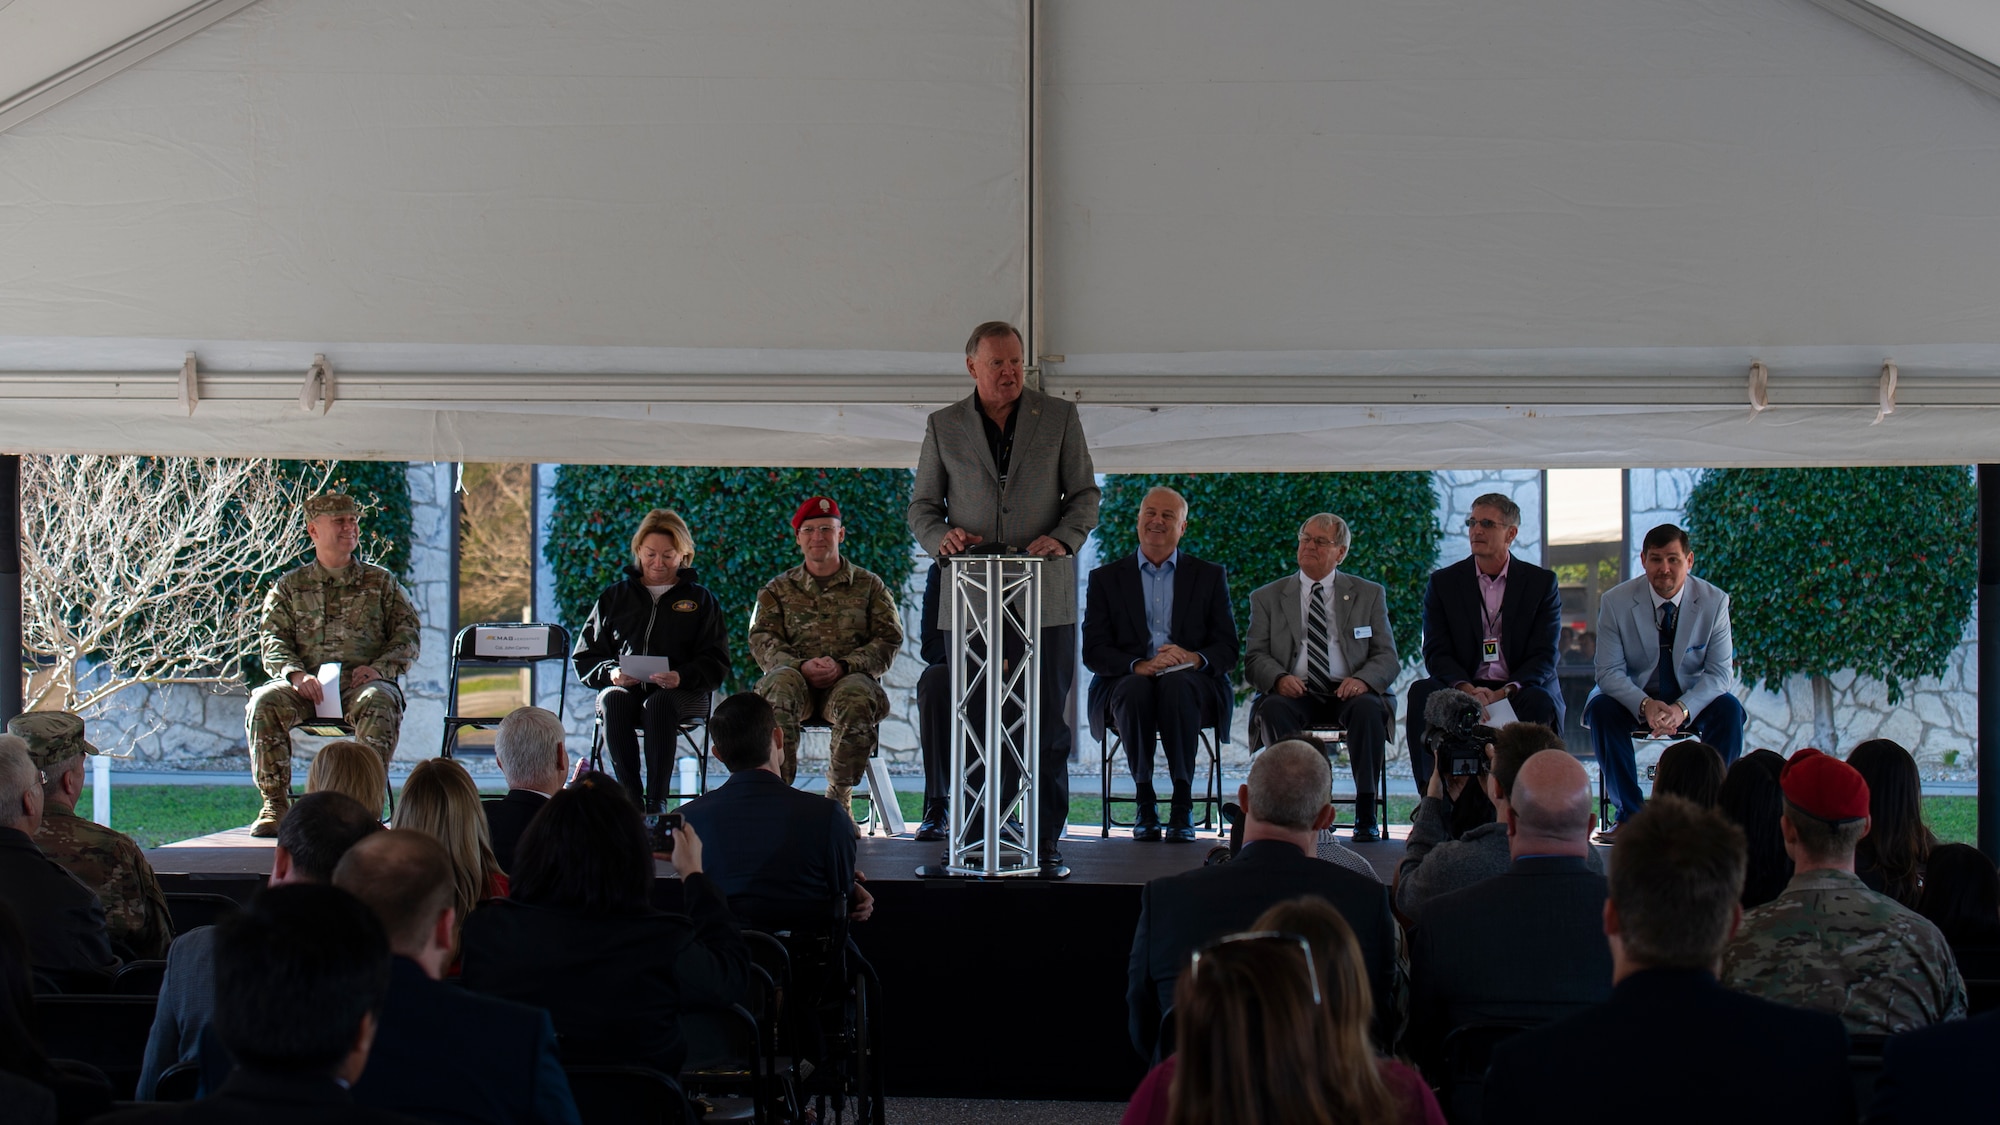 Retired U.S. Air Force Col. John Carney gives remarks during a ribbon cutting and dedication ceremony in Fort Walton Beach, Florida, Jan. 11, 2018.